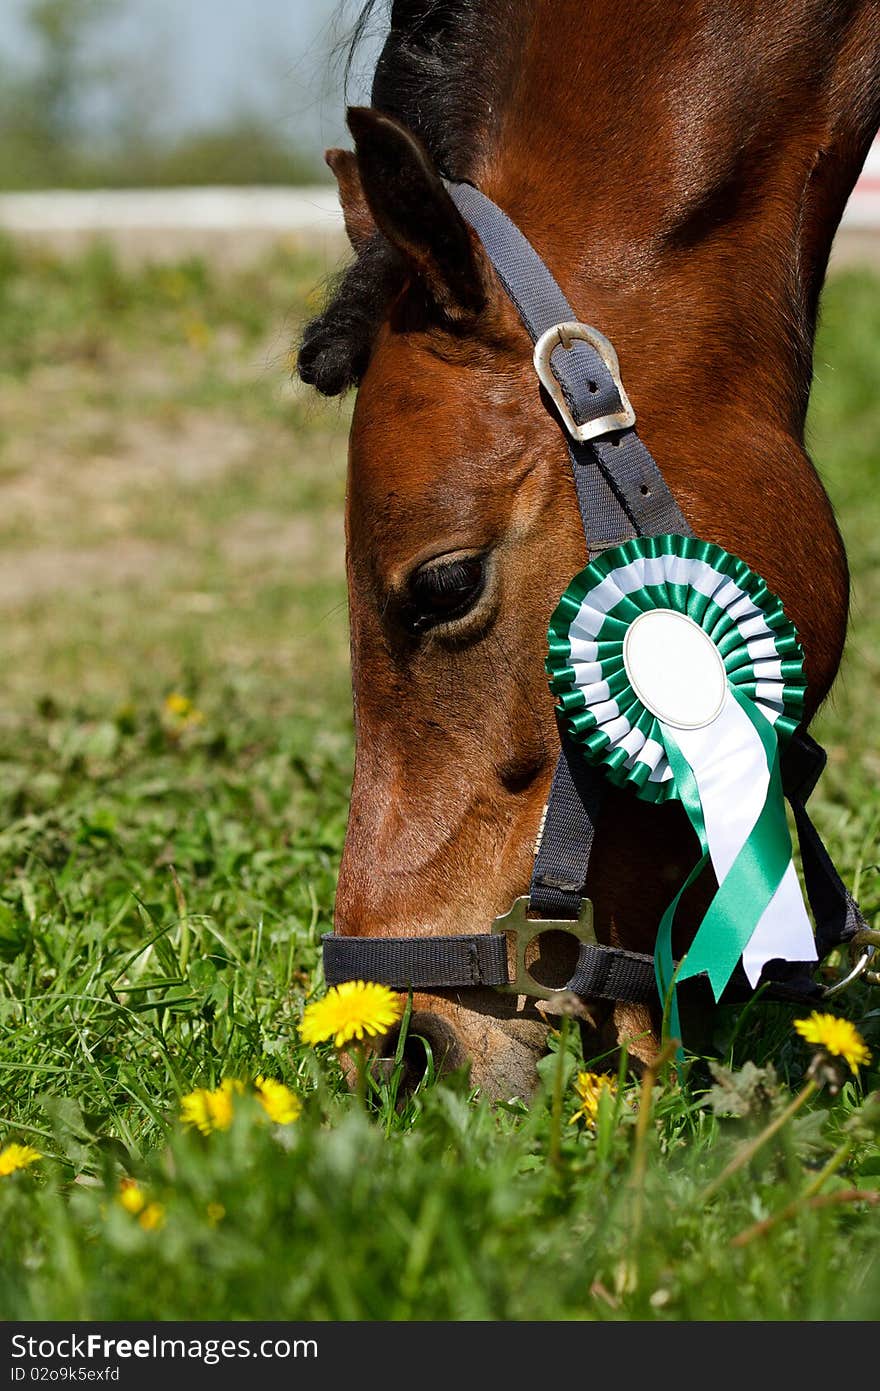 Pony with green rosette, eating grass